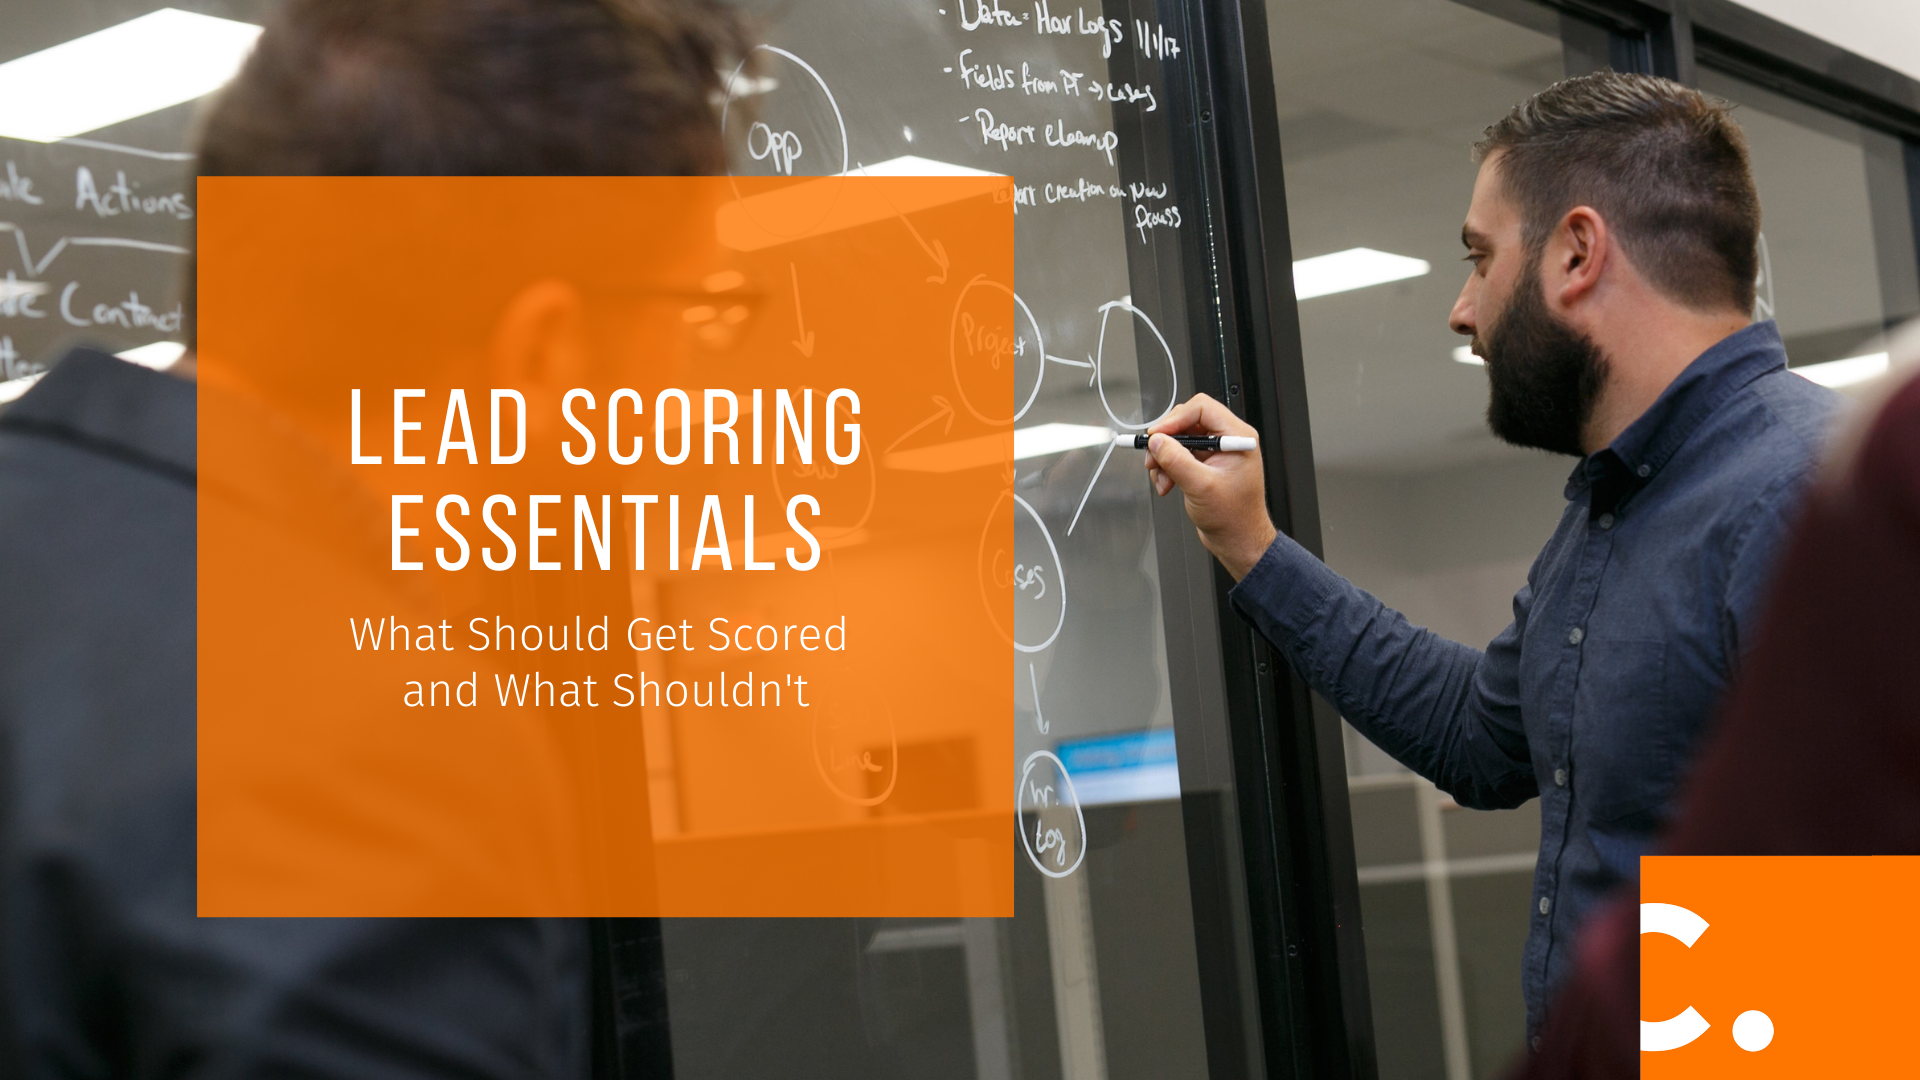 Read our tips to building a top performing lead scoring model.